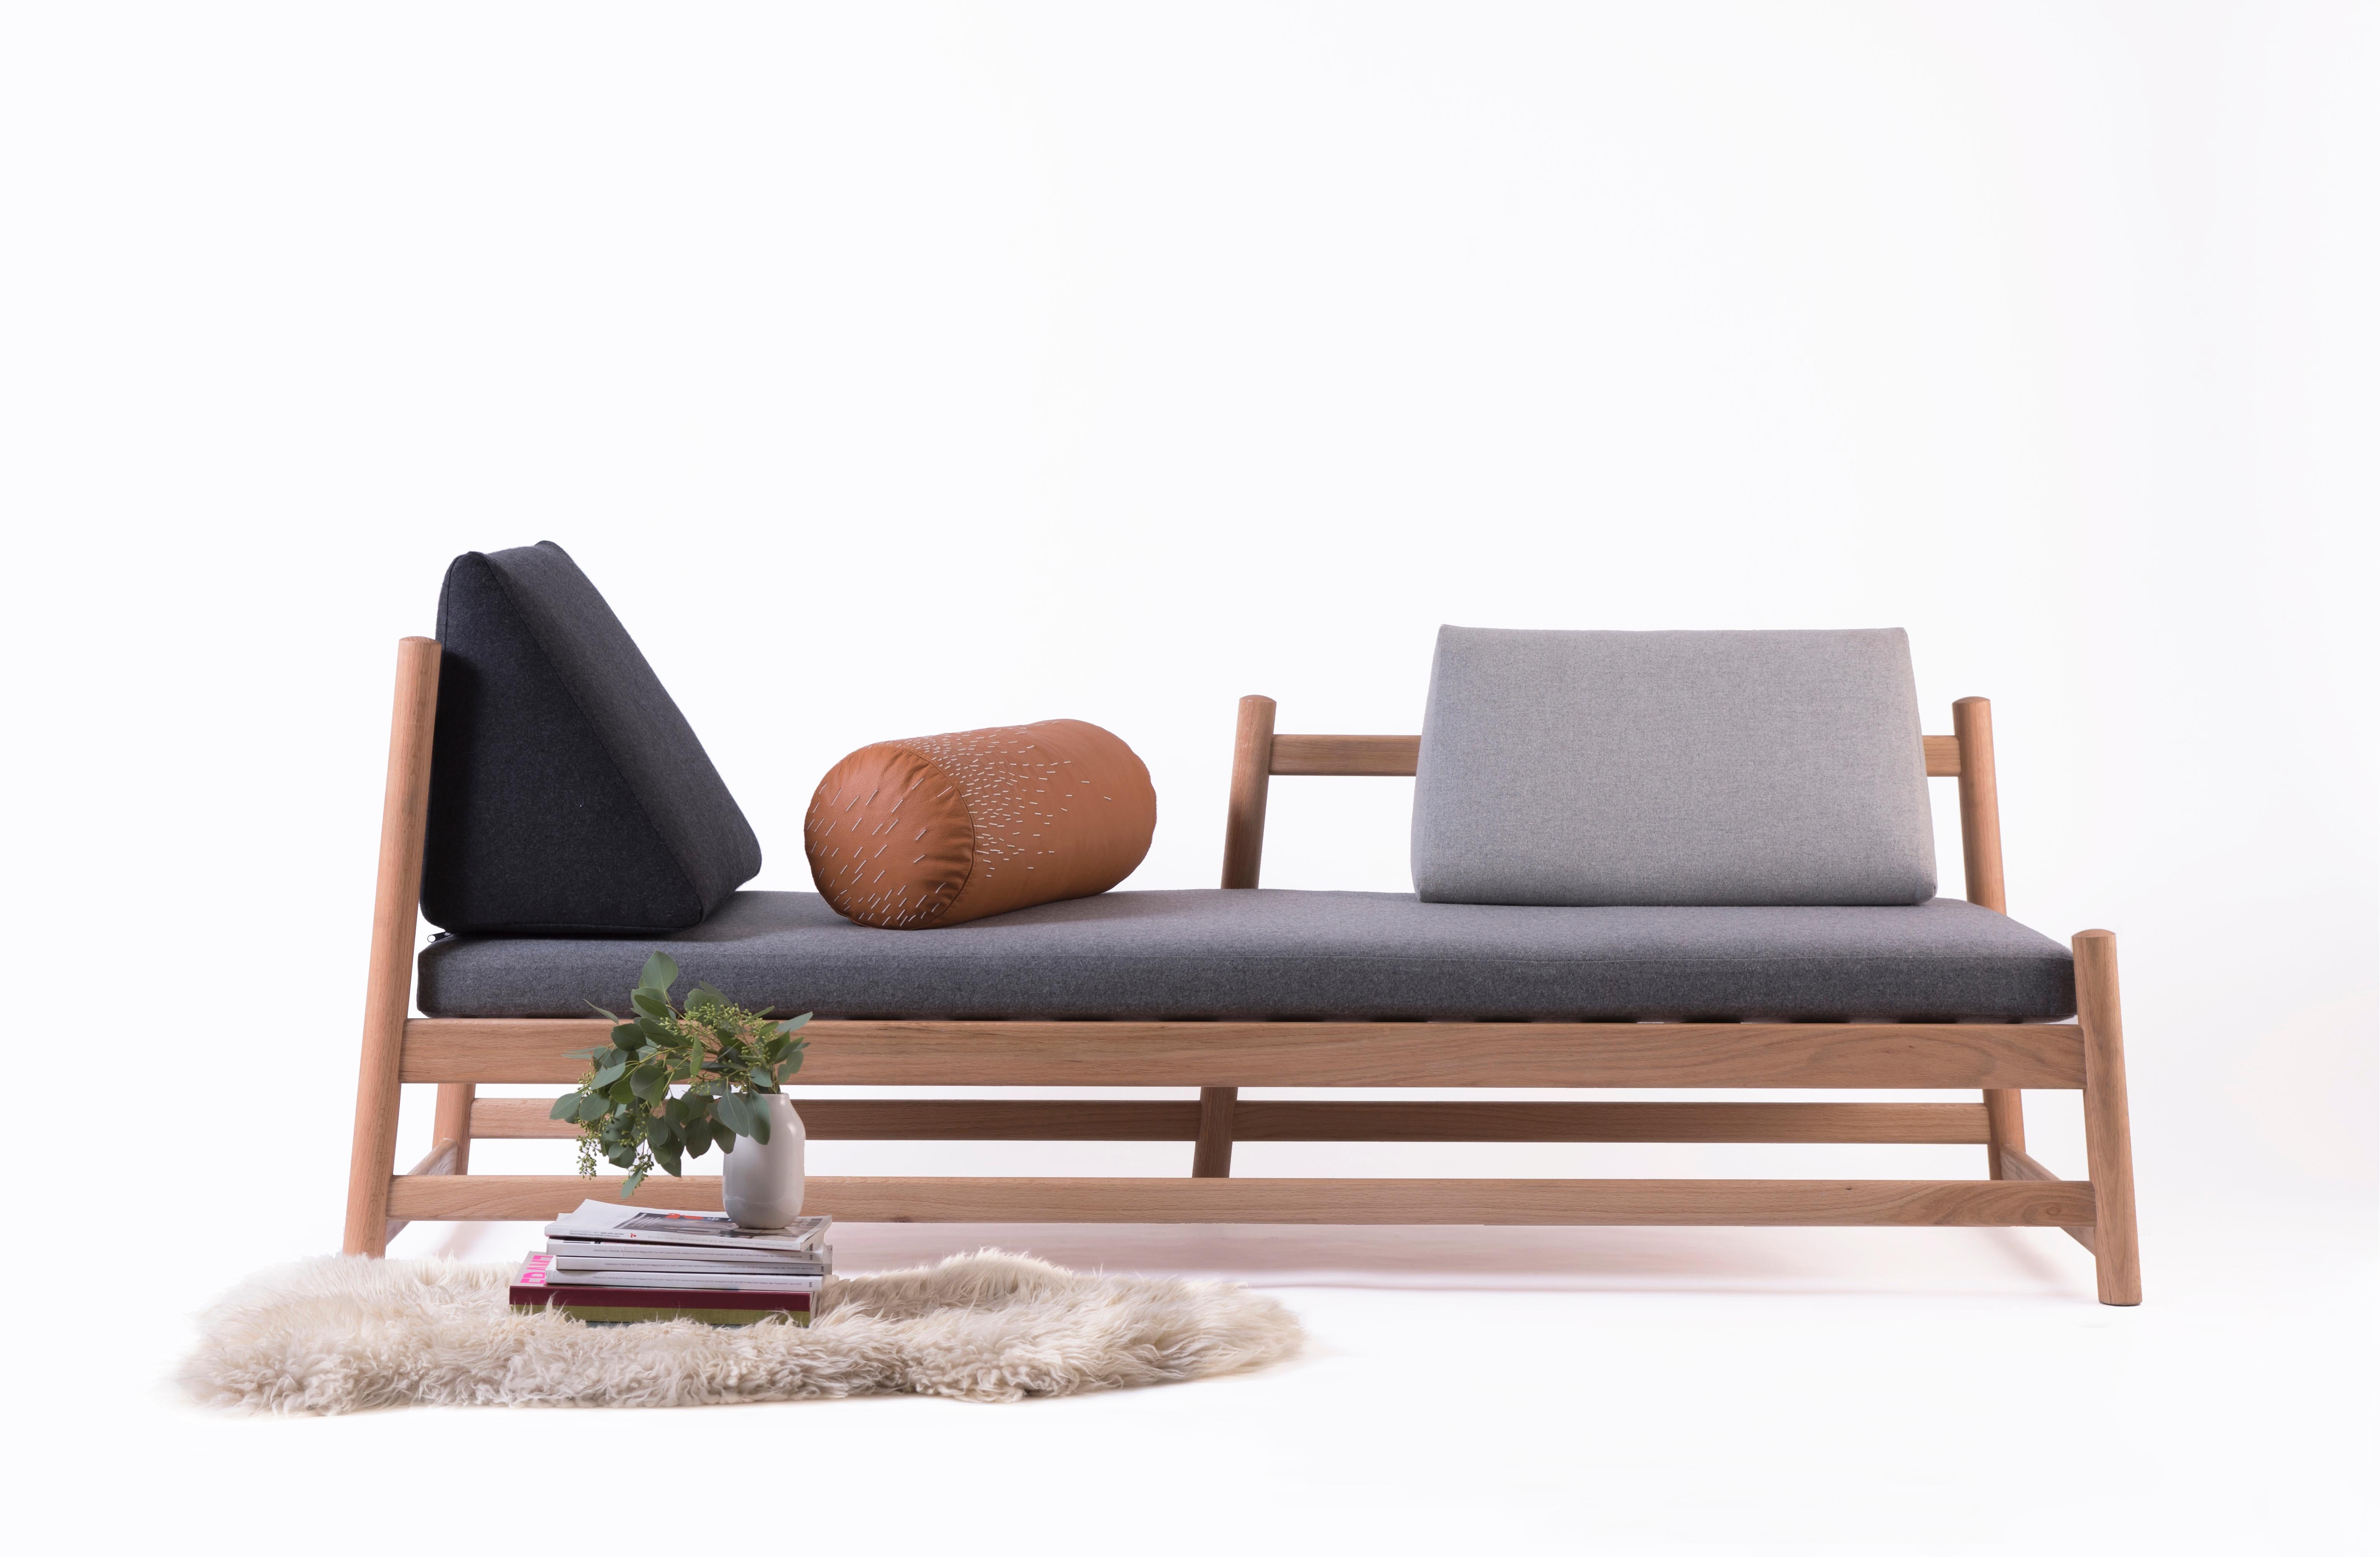 A daybed is the piece of furniture that every room needs, whether it knows it or not. Pita’s subtle lines in woodturned oak invite you to take a breath, close your eyes and halt the passage of time. 

Materials: Solid Oak Wood and Gray Scale